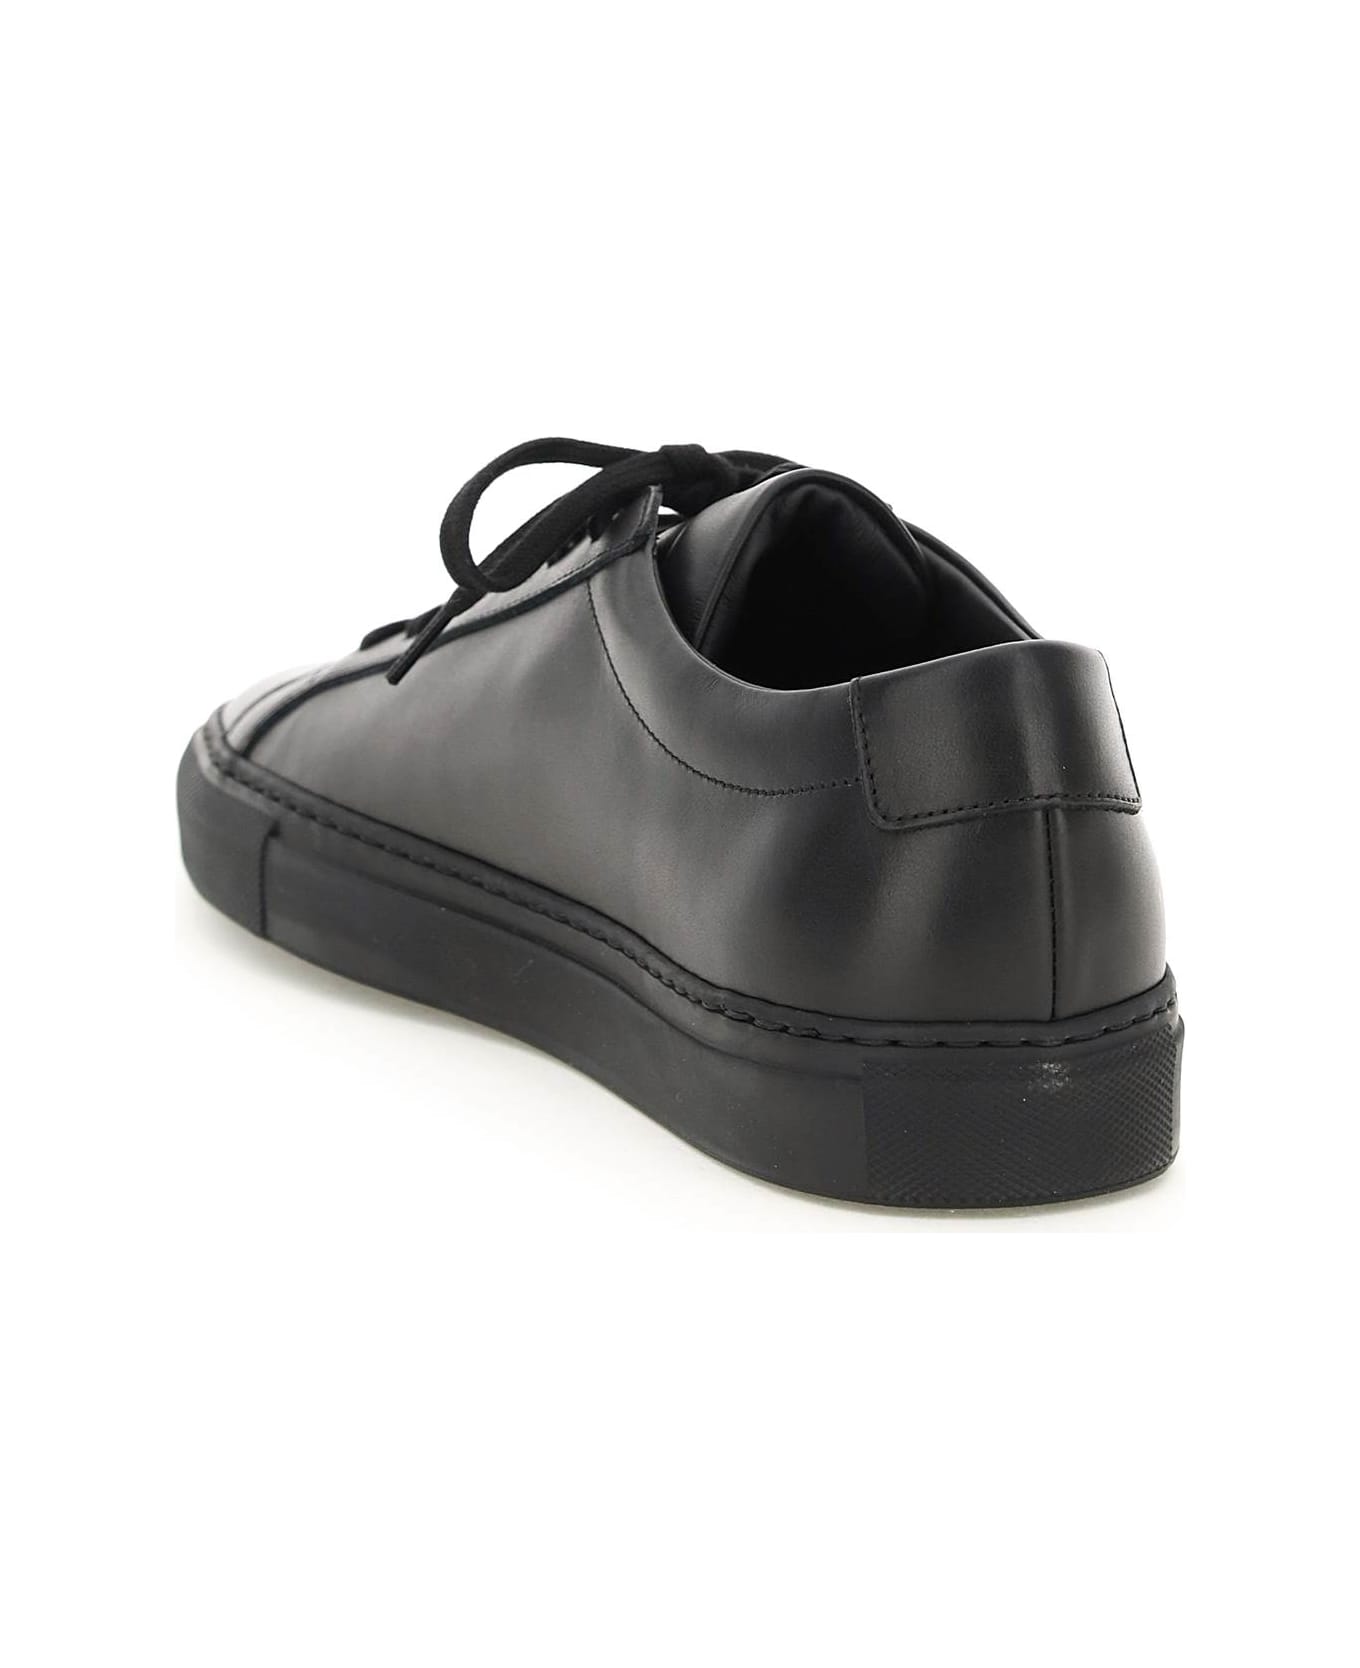 Common Projects Black Leather Achilles Sneakers - Black